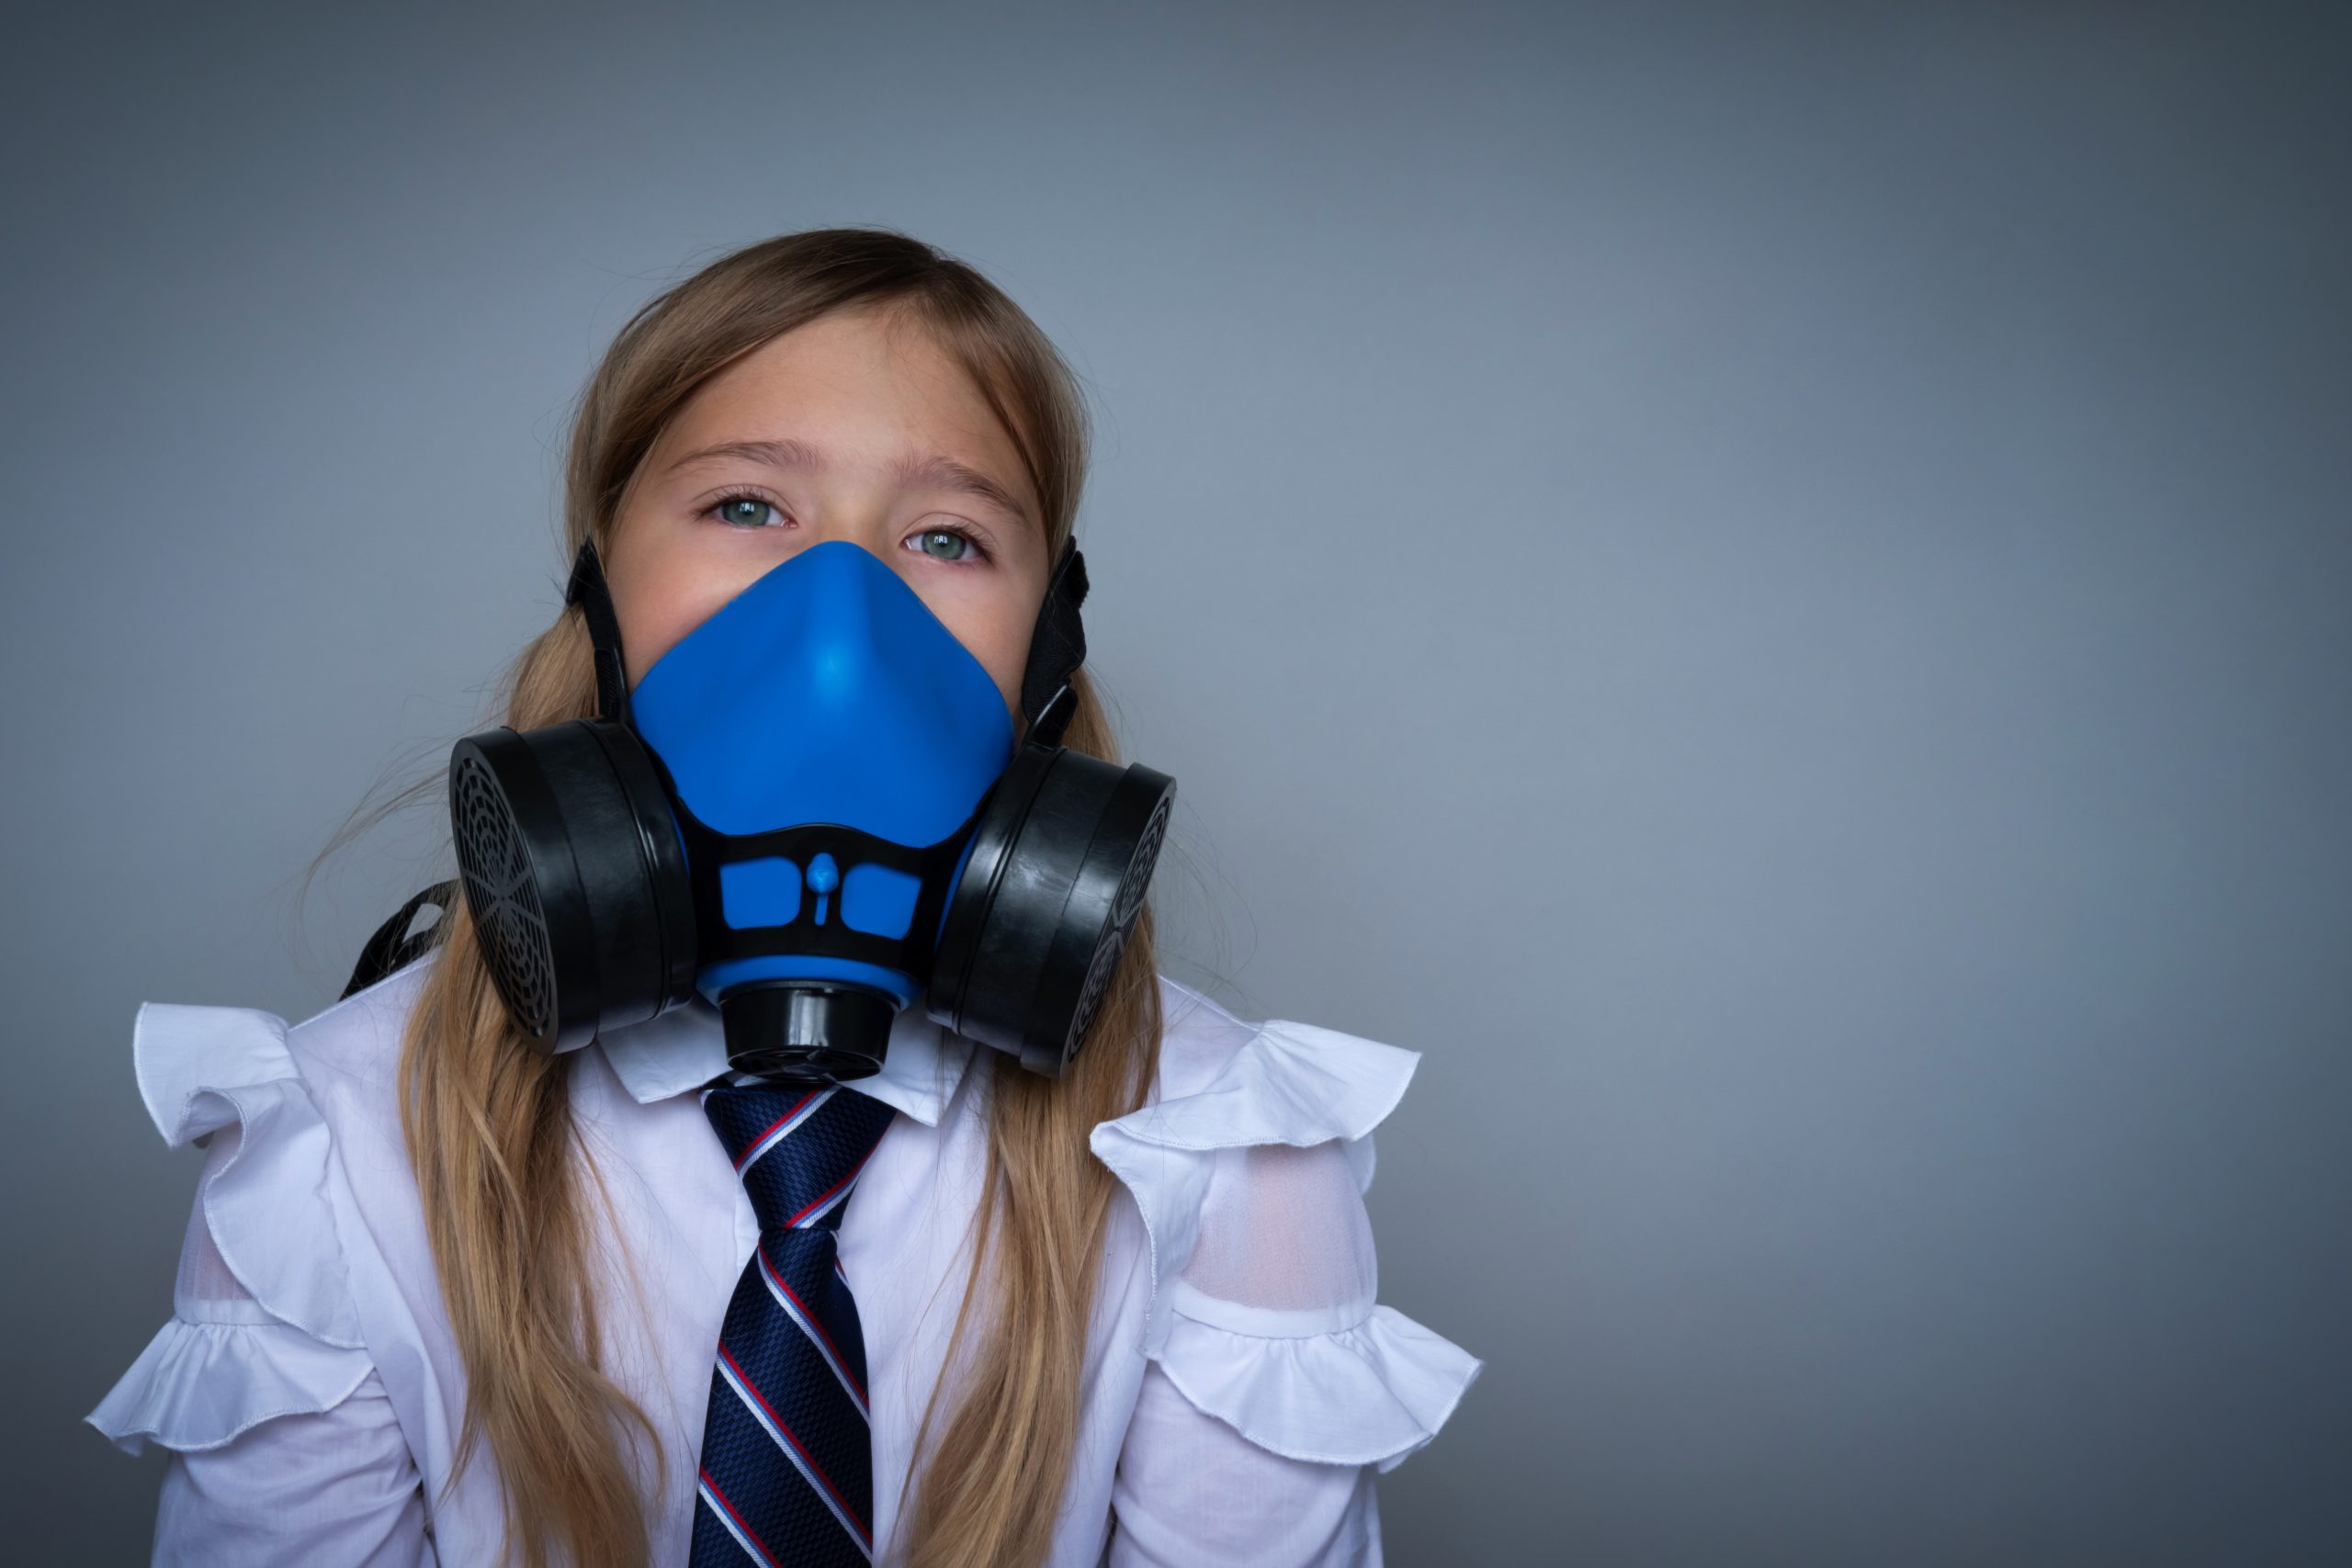 Is air quality affecting your students’ performance?